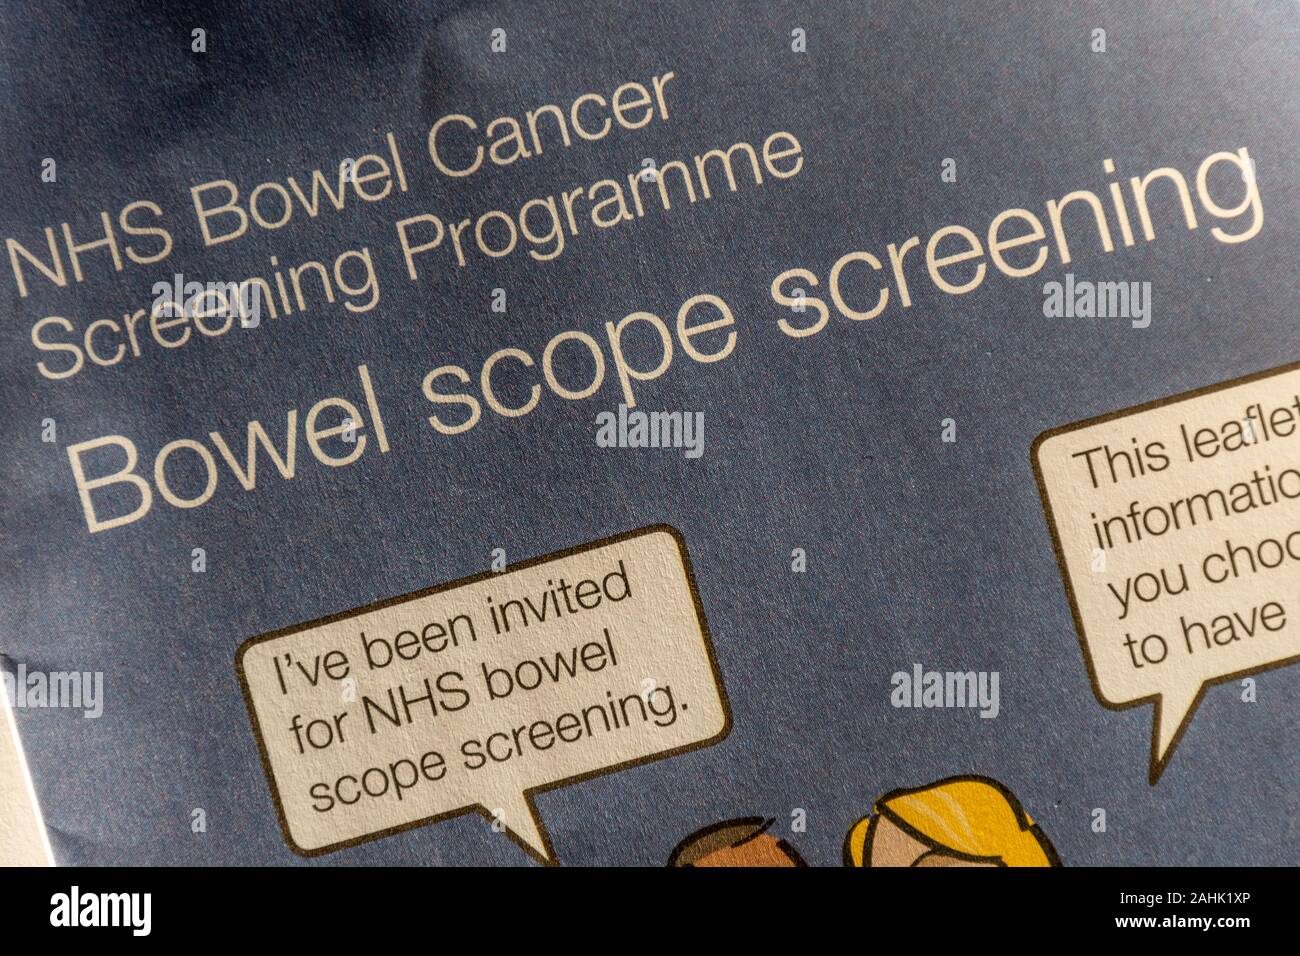 NHS bowel cancer screening programme - leaflet with information about bowel scope screening Stock Photo